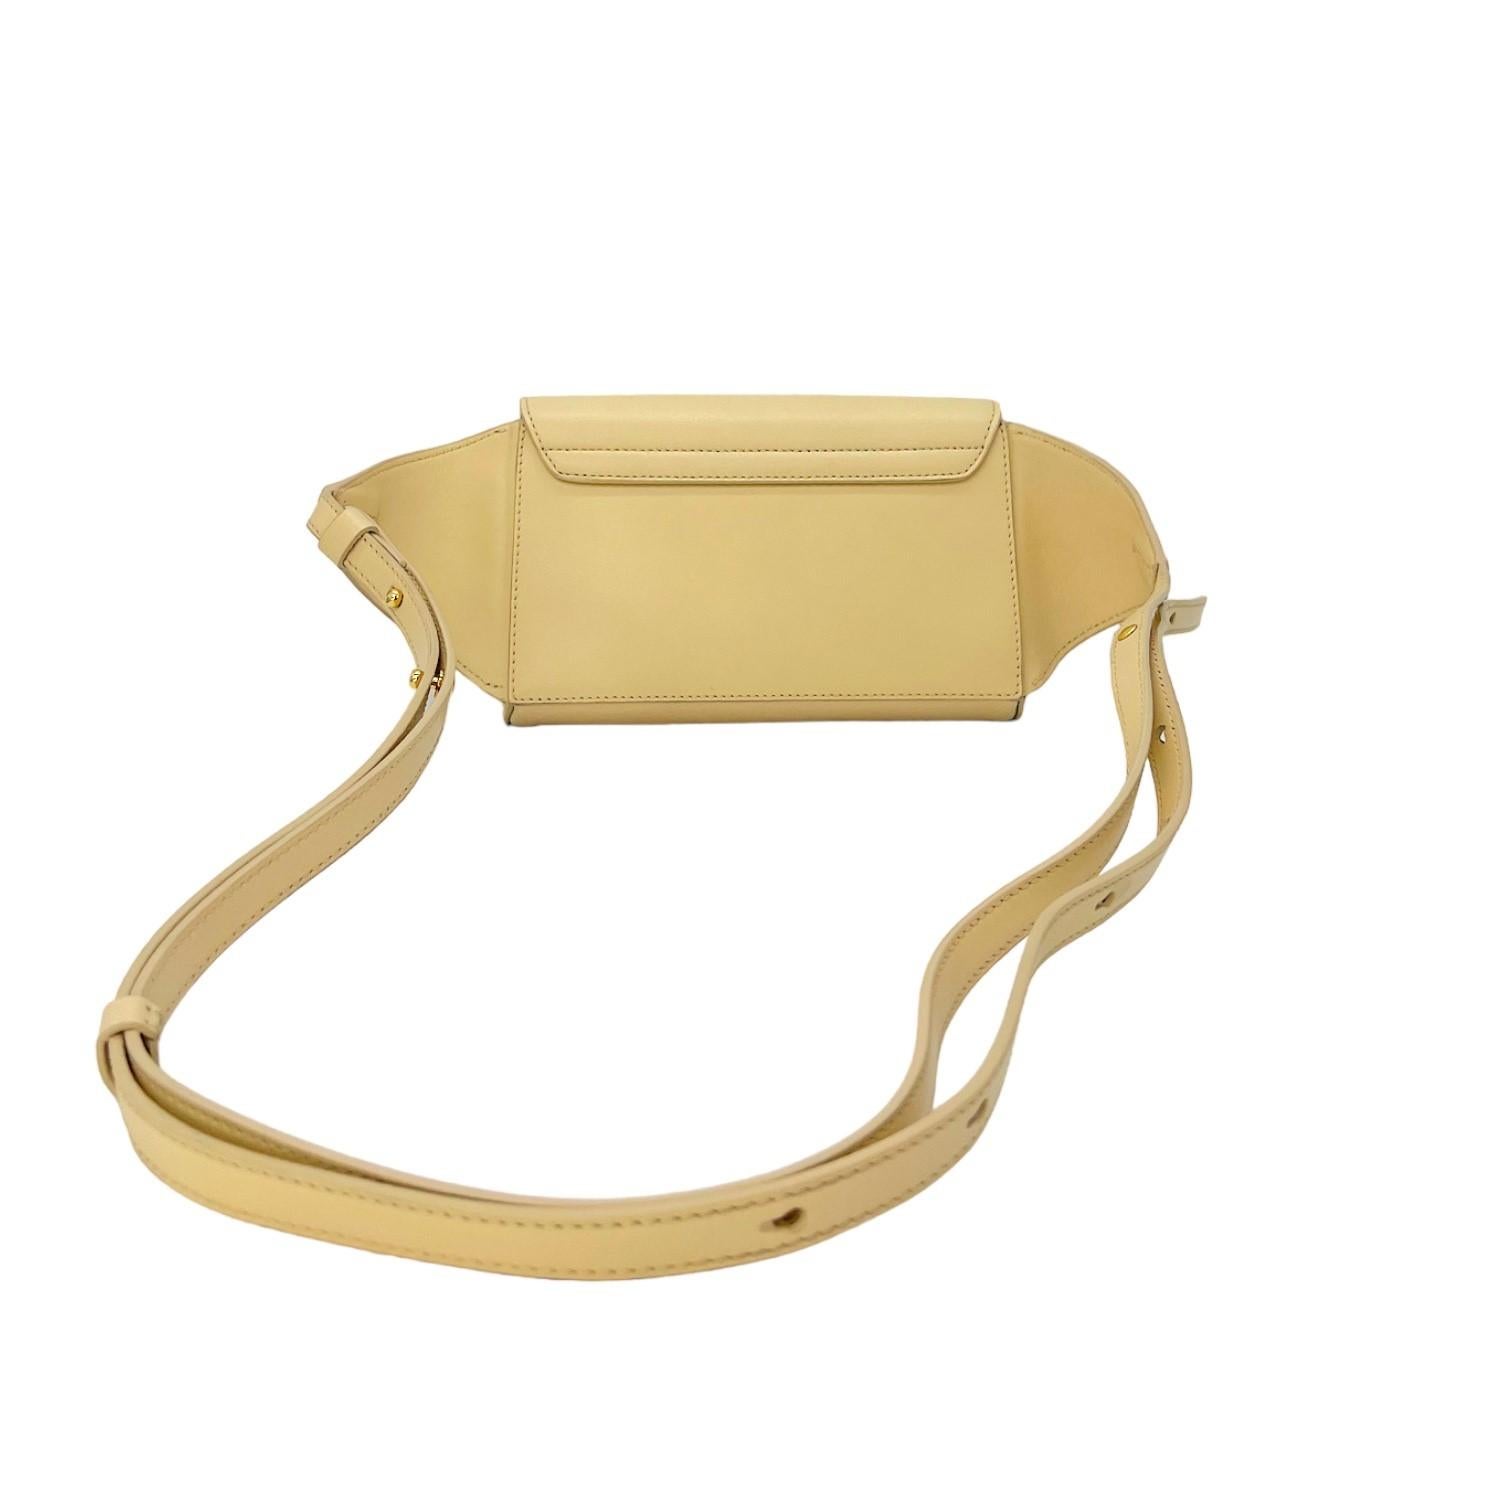 This Chloé Belt Bag was made in Italy and it is finely crafted of a calfskin leather and suede exterior with gold-tone hardware features. It has a fold over snap closure that opens up to a canvas interior with a slip pocket. It features an